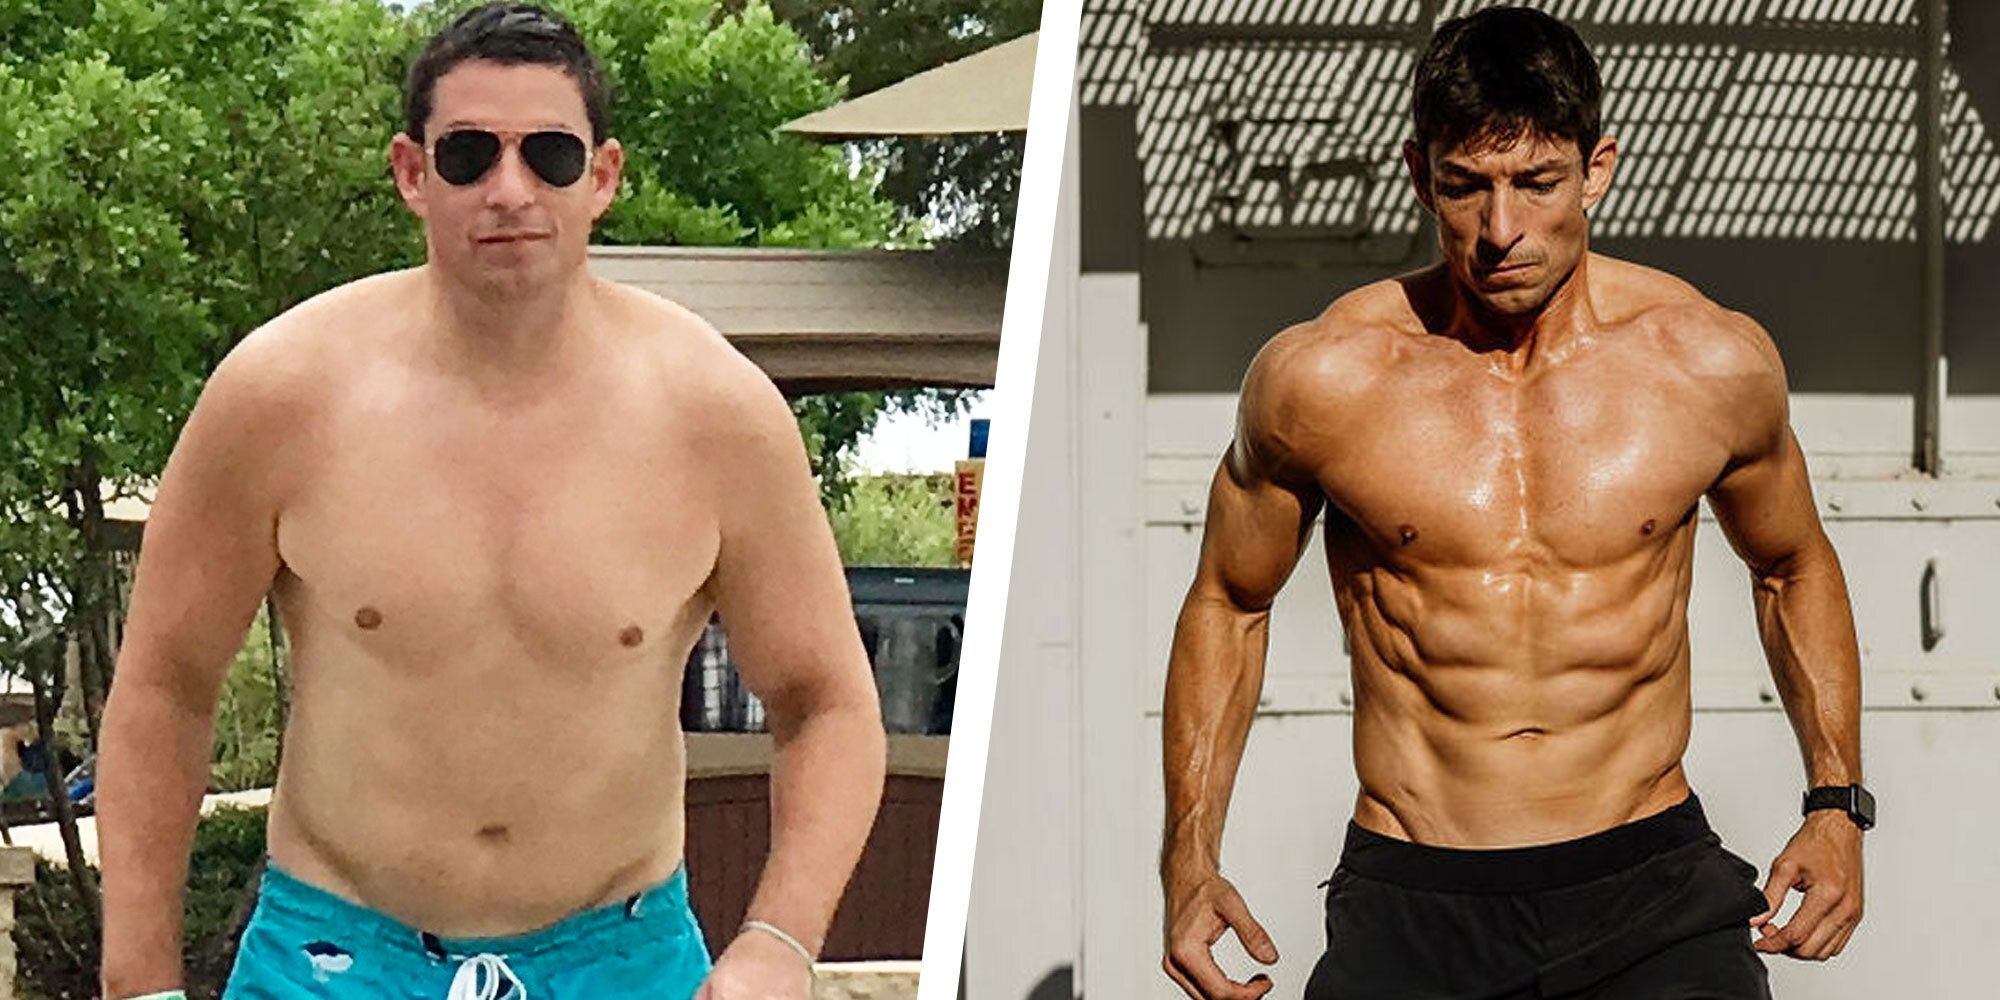 Running and Weights Helped This Man Get Shredded in 5 Months